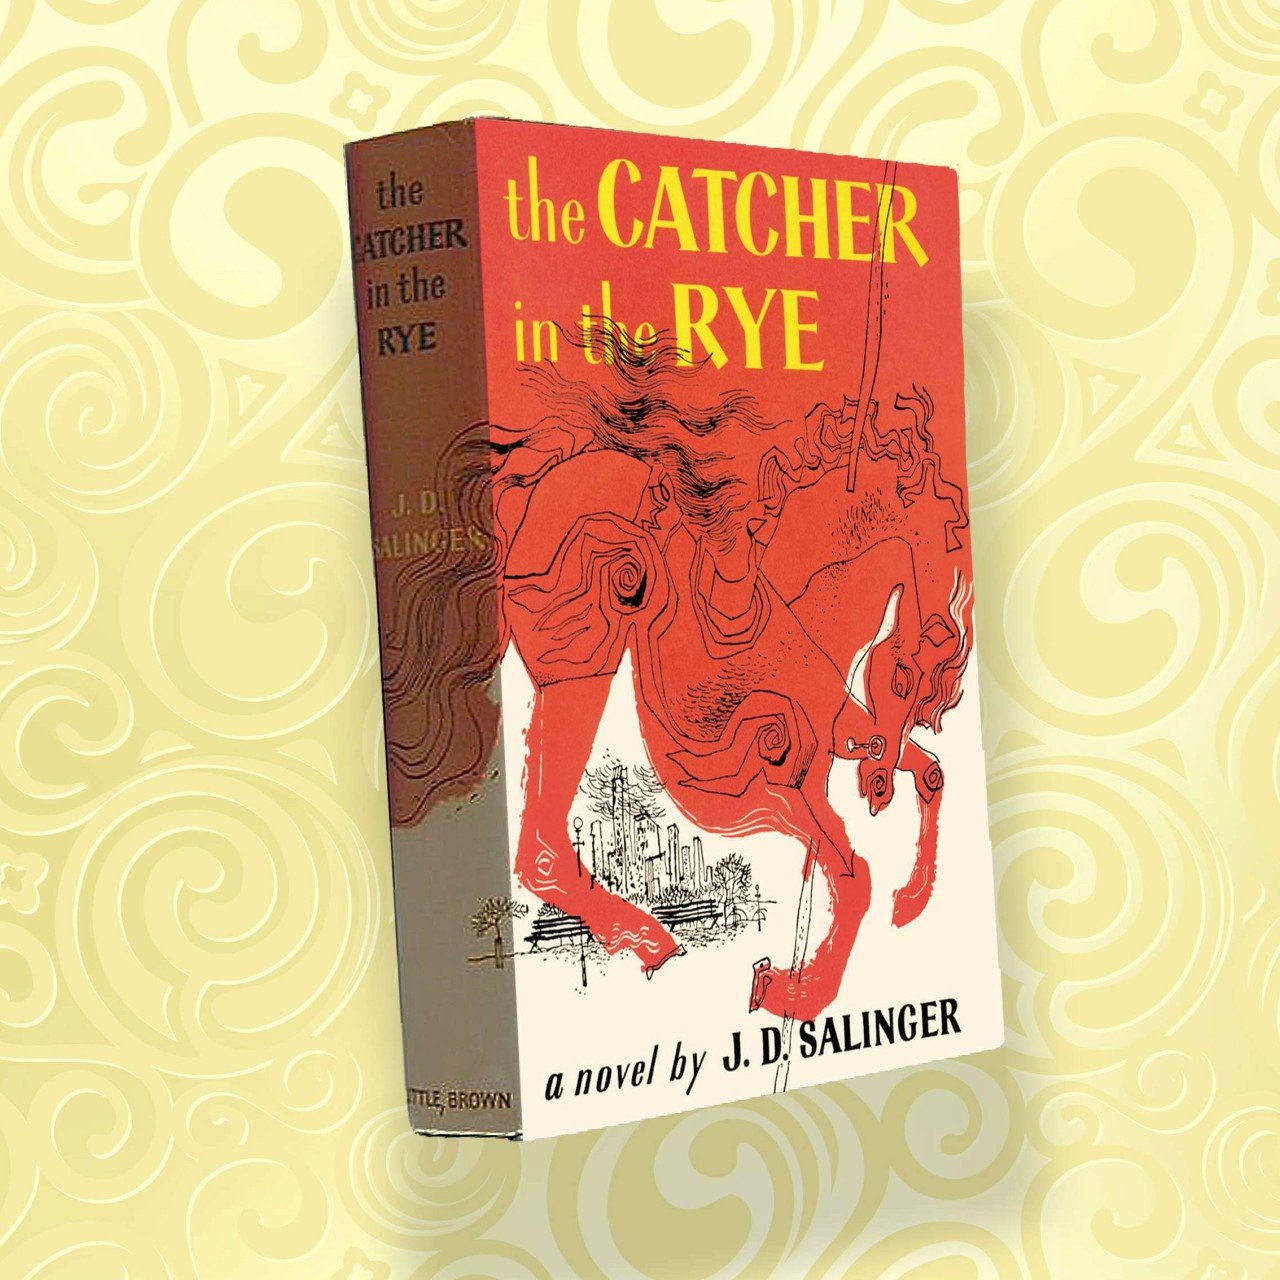 the catcher in the rye cover